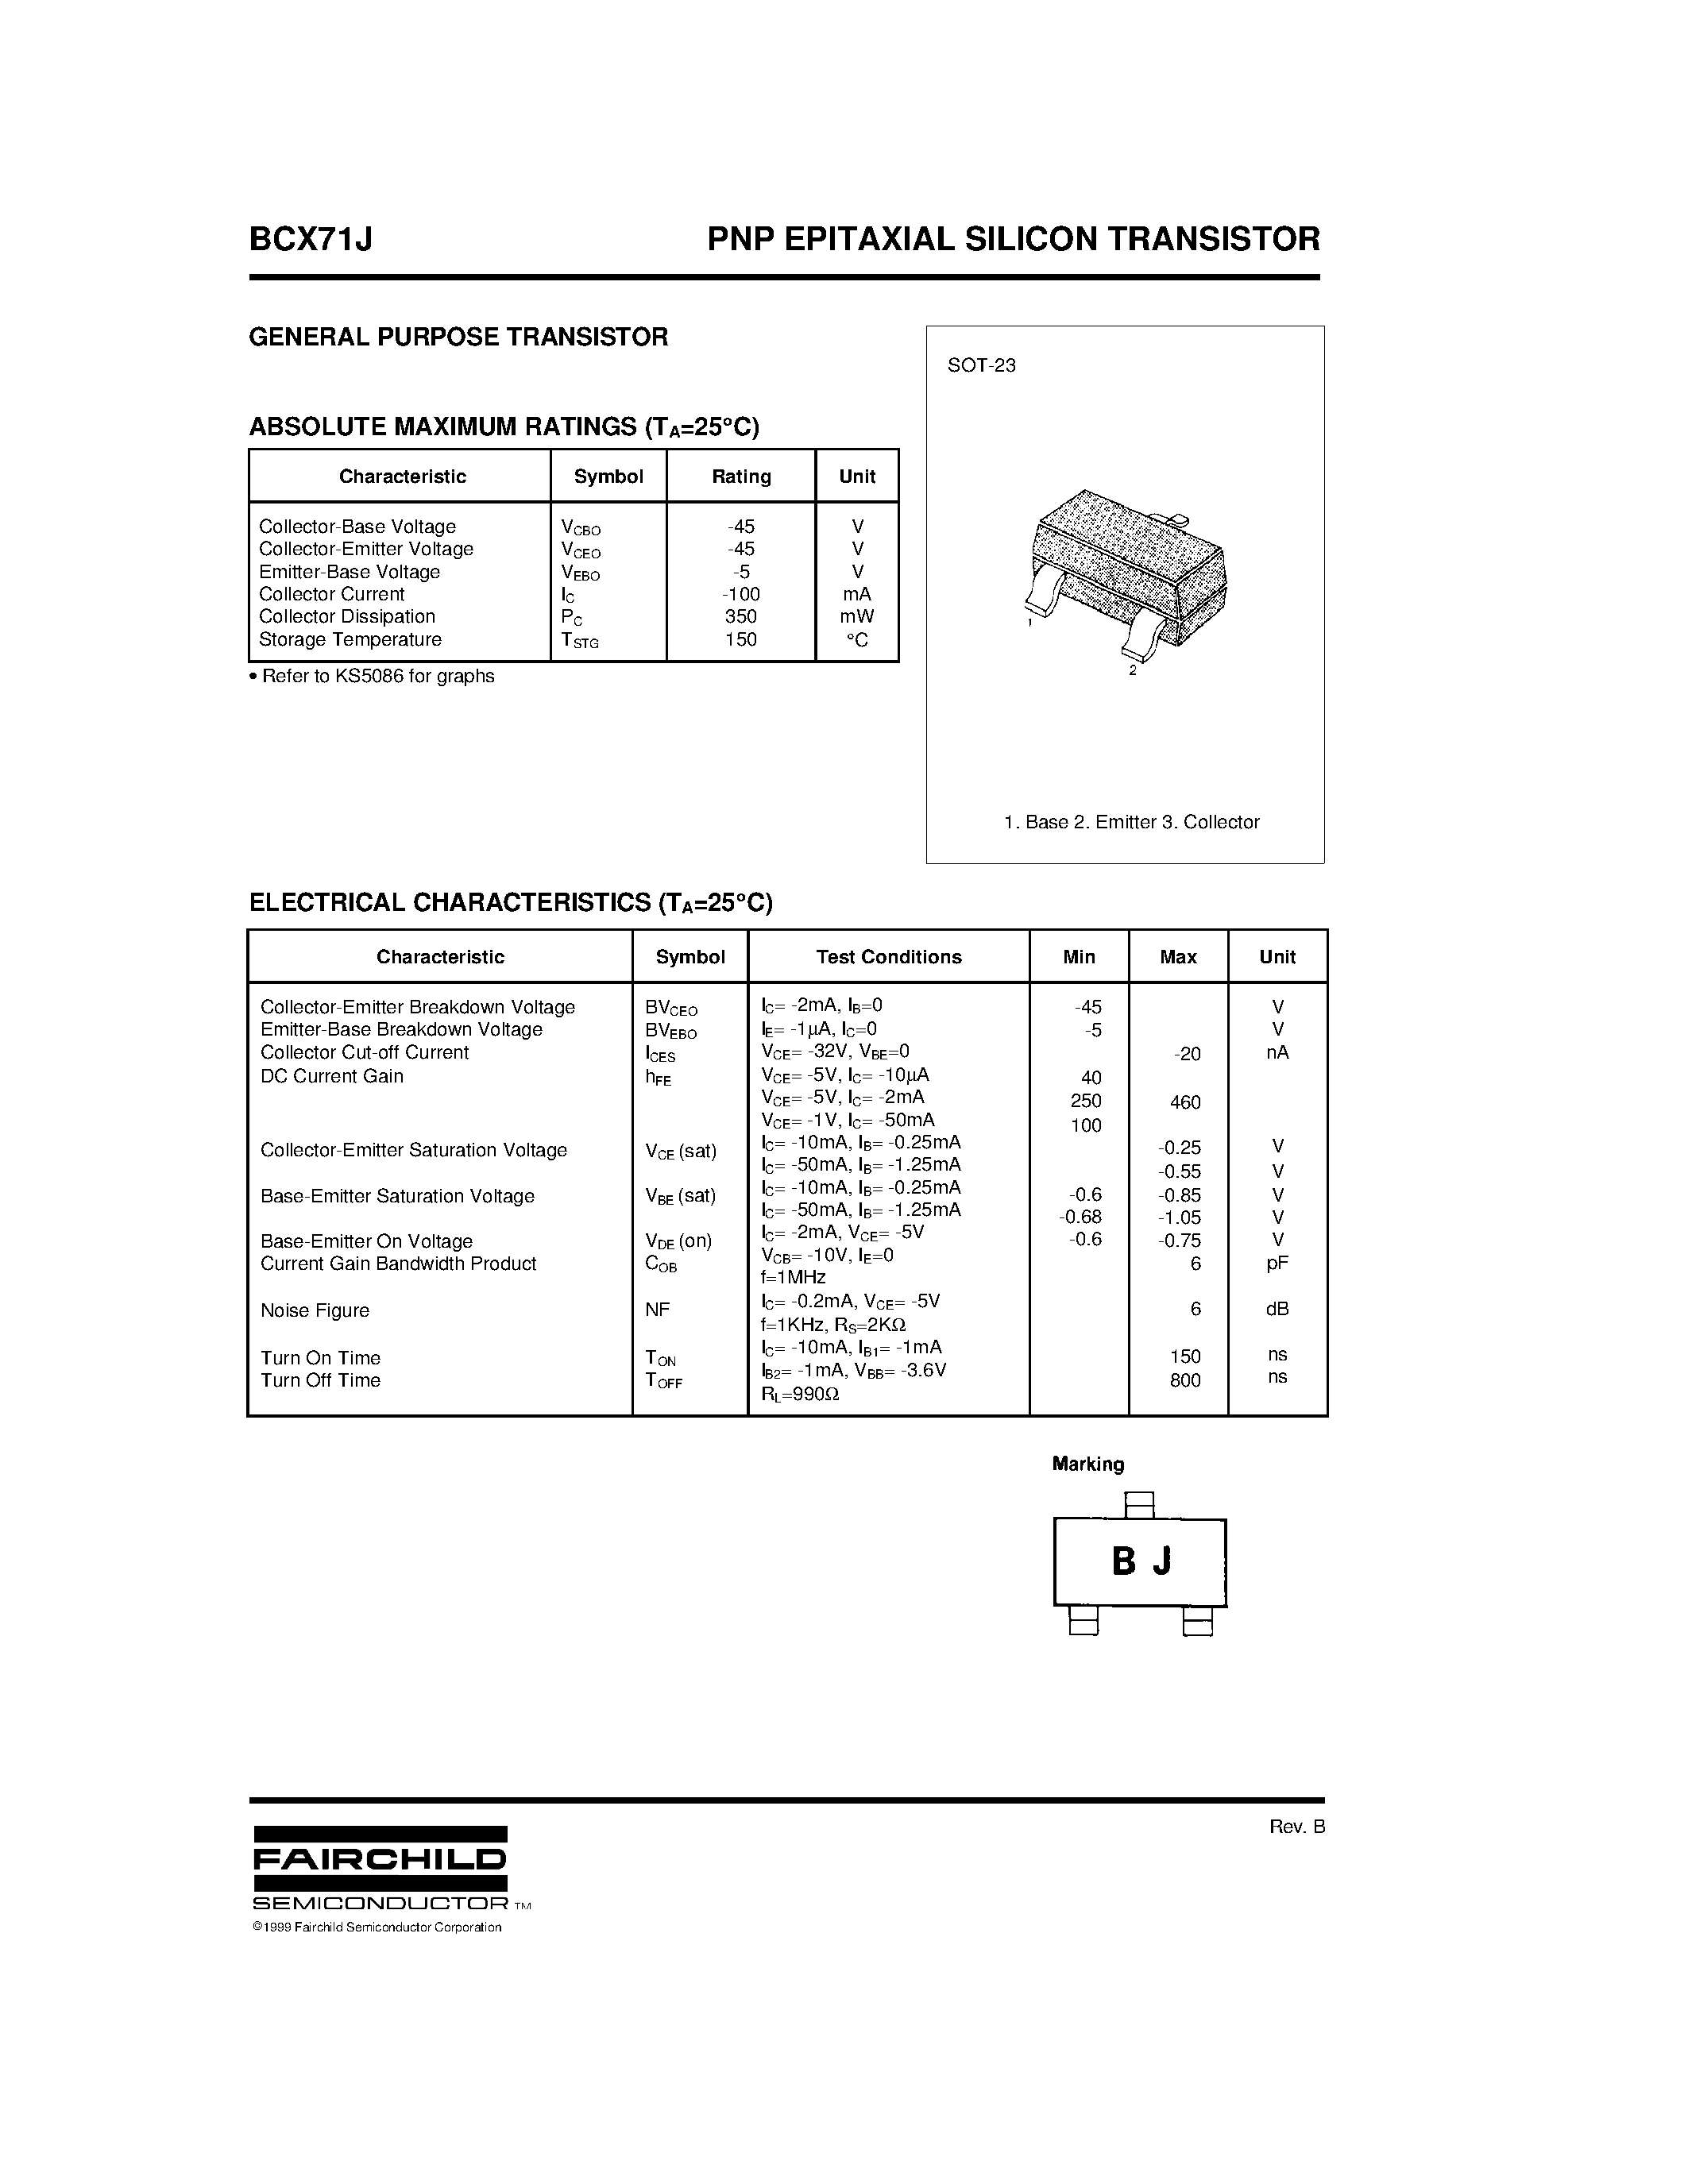 Datasheet BCX71J - PNP EPITAXIAL SILICON TRANSISTOR page 1